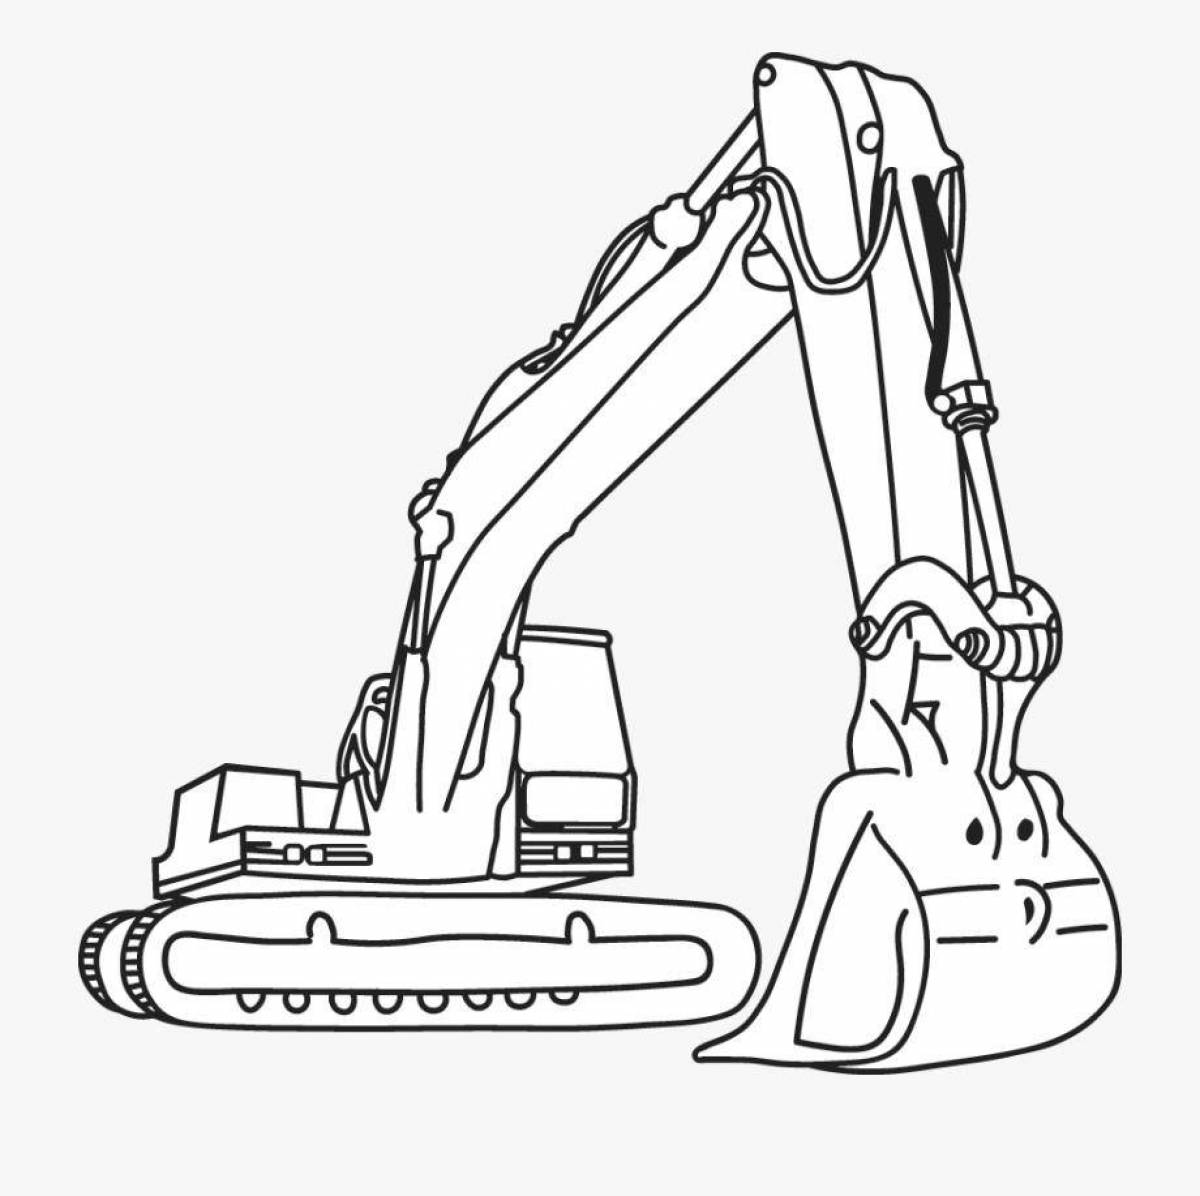 Color fun excavator coloring book for kids